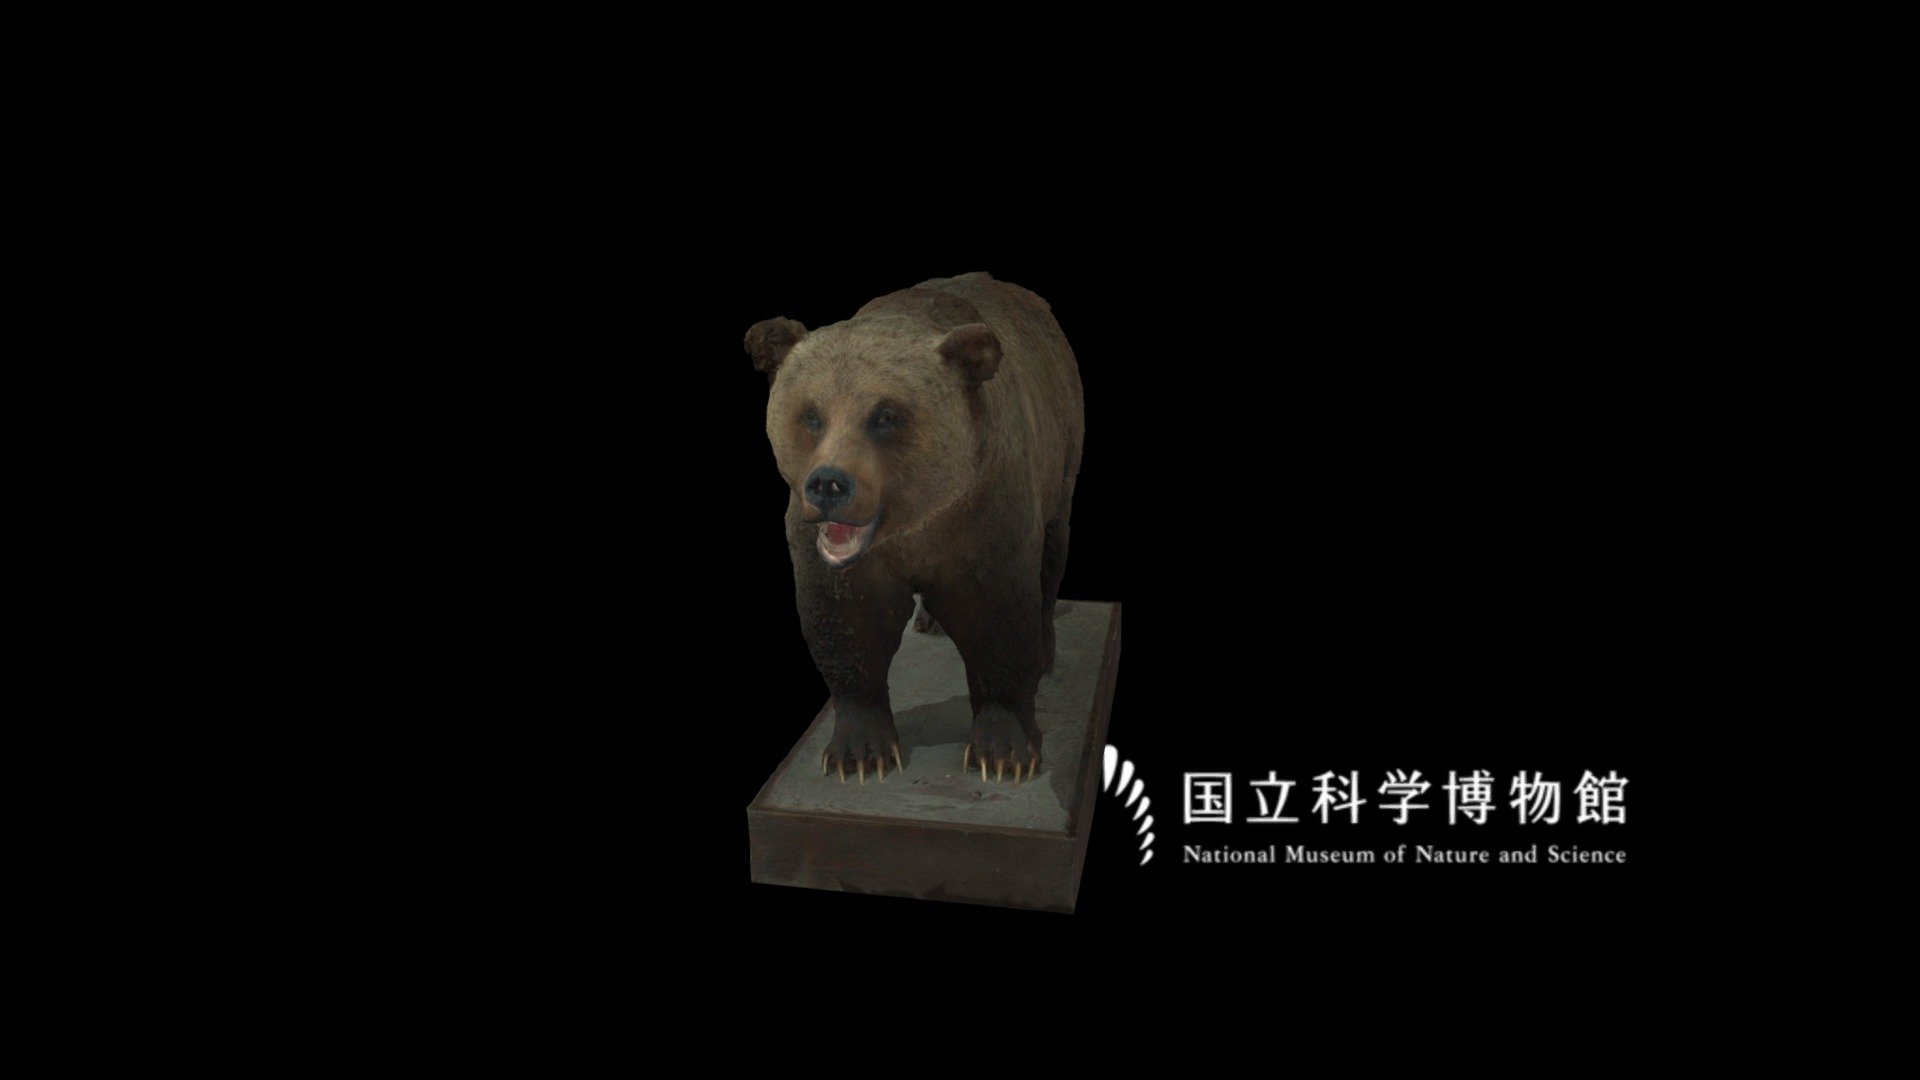 ■ About specimen



Scientific name : Ursus arctos

Japanese vernacular name : ヒグマ

English vernacular name : Grizzly Bear

Specimen type : Taxidermy specimen

Collection date : 1964-09

Collection place : Dutch Creek, East Kootenay, BRITISH COLUMBIA, CANADA

See also : record page on the &ldquo;Yoshimoto 3D